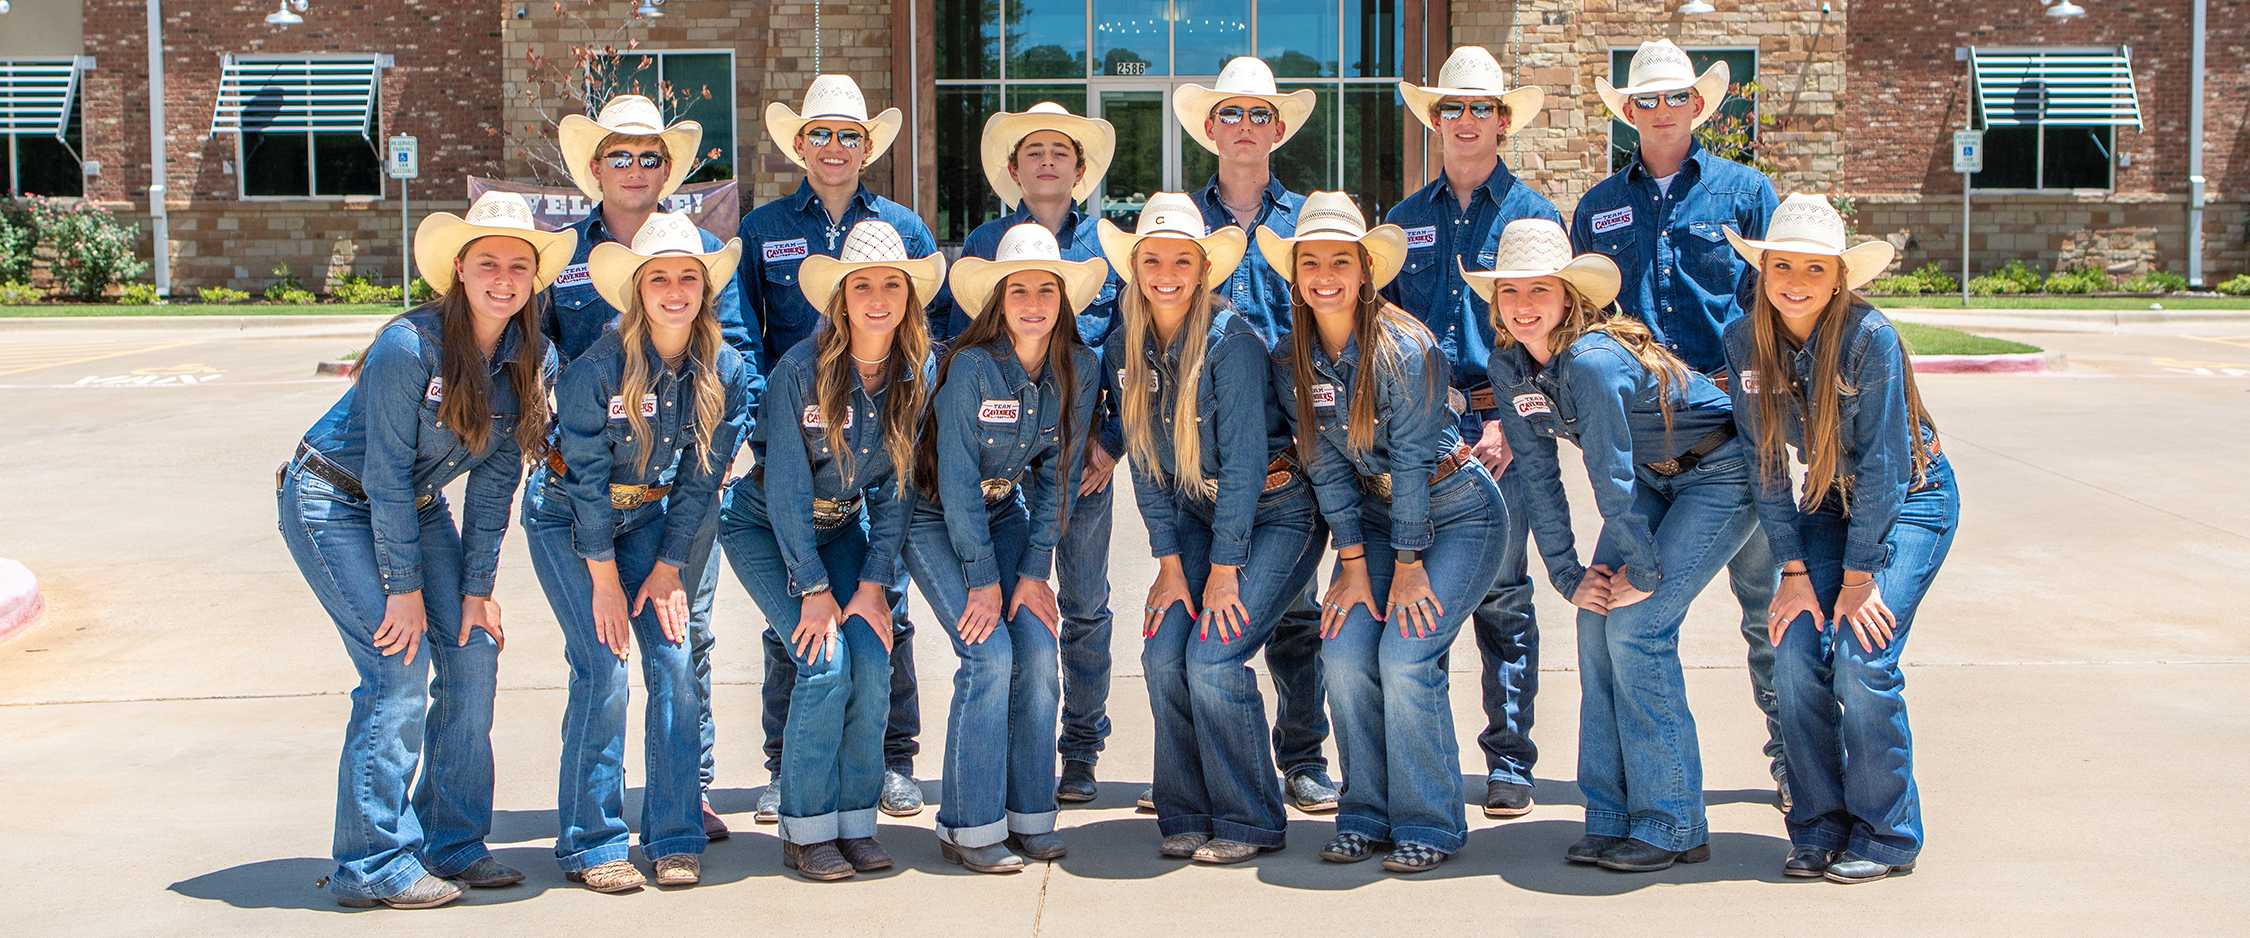 Team Cavender's Youth Rodeo Team